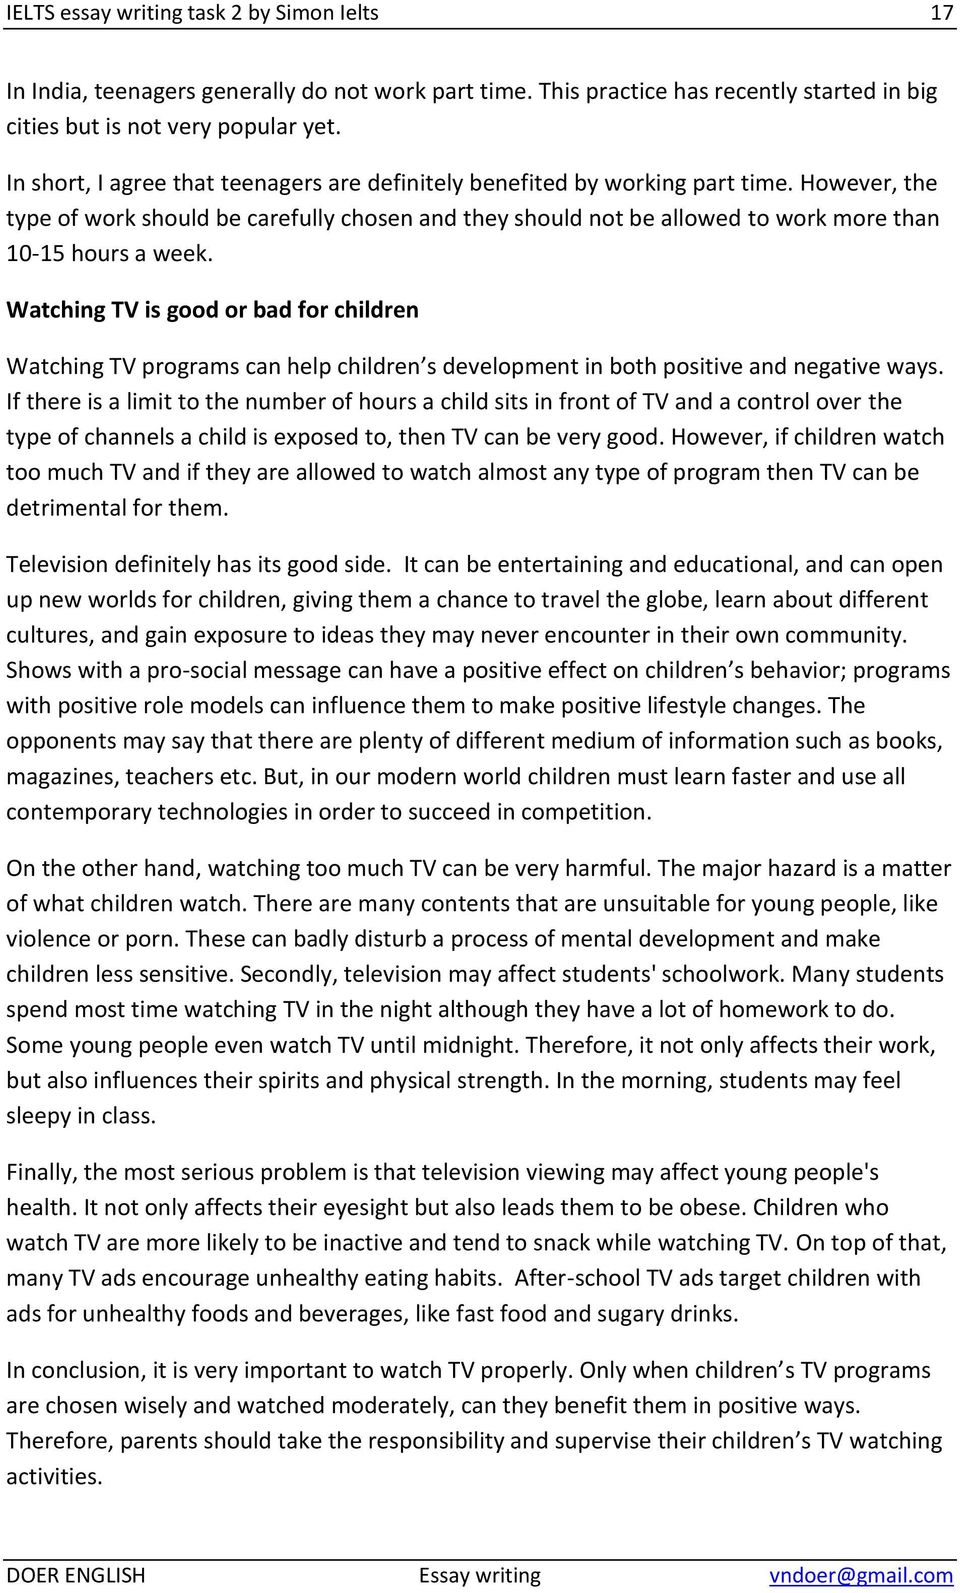 Essay About Tv And Children